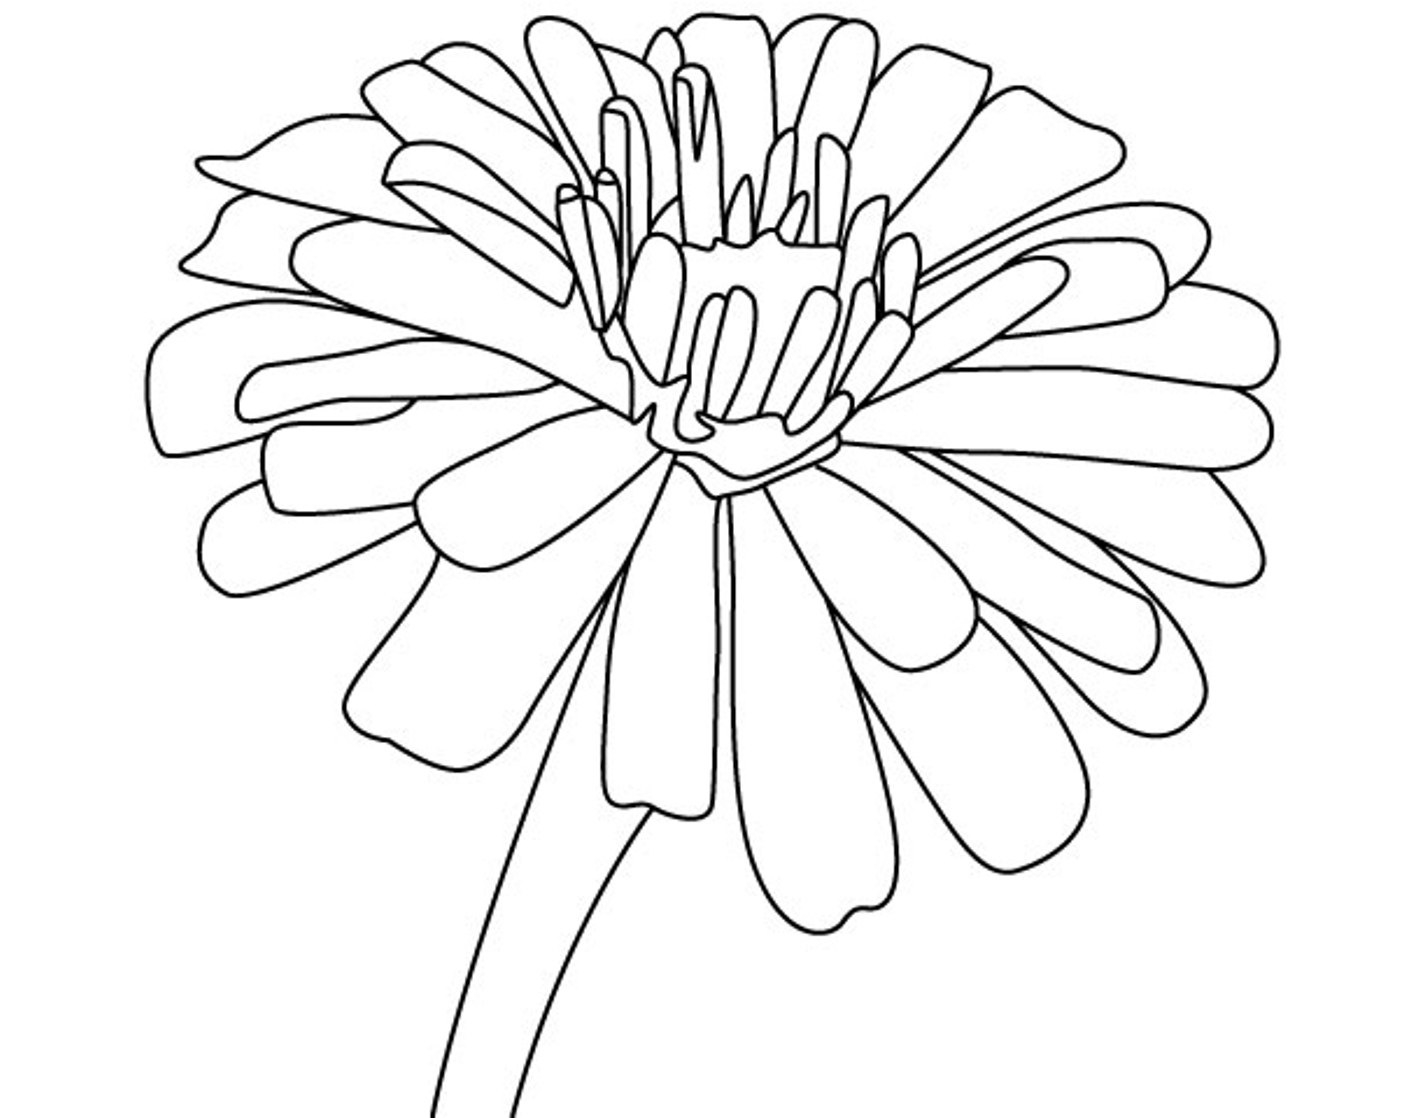 Zinnia Coloring Pages   Best Coloring Pages For Kids